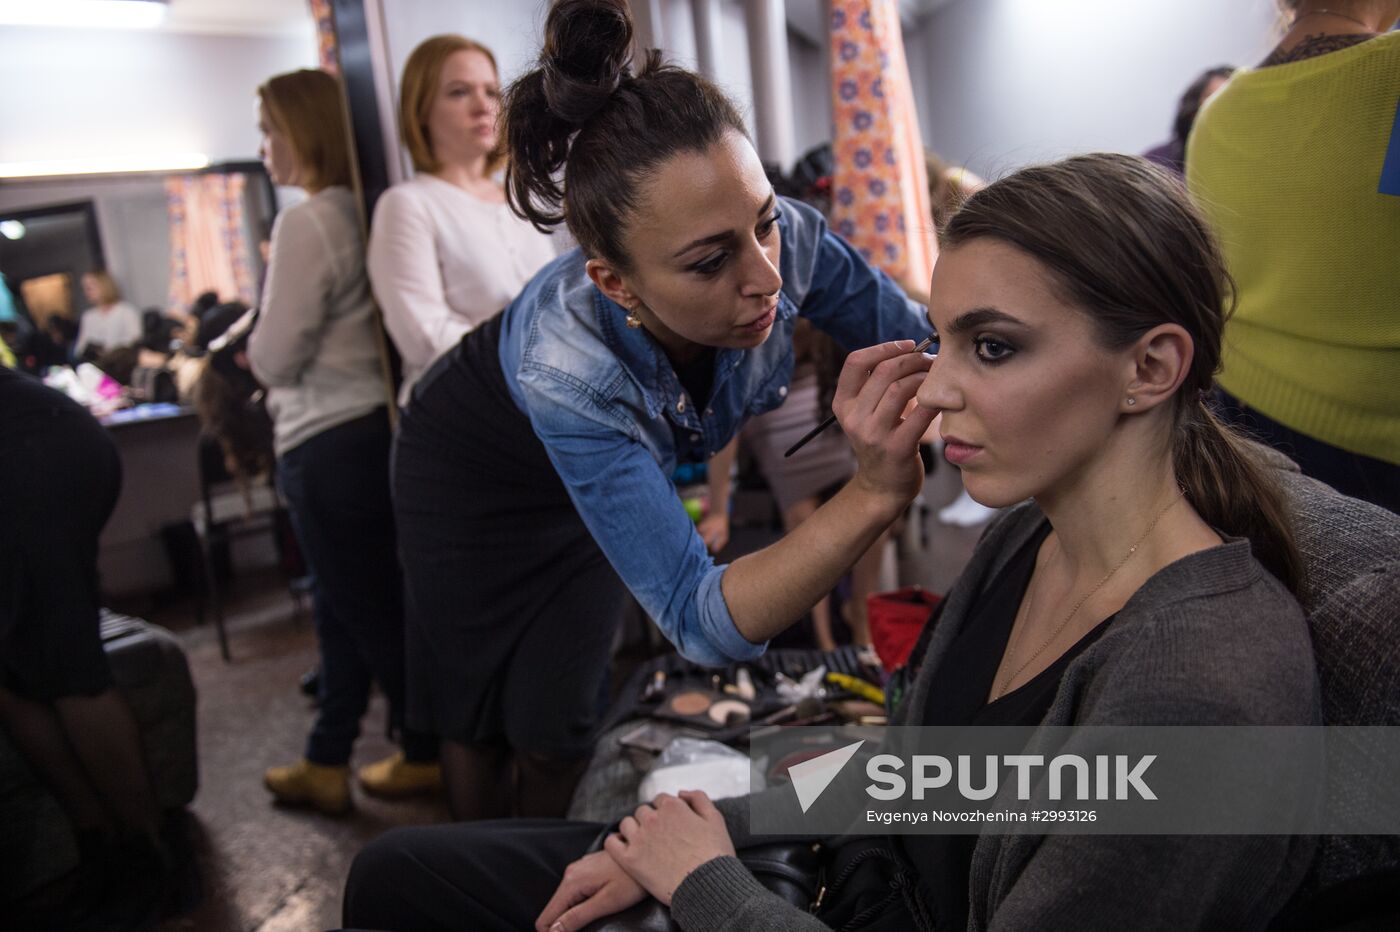 Moscow hosts Beauty of Russia 2016 pageant finals